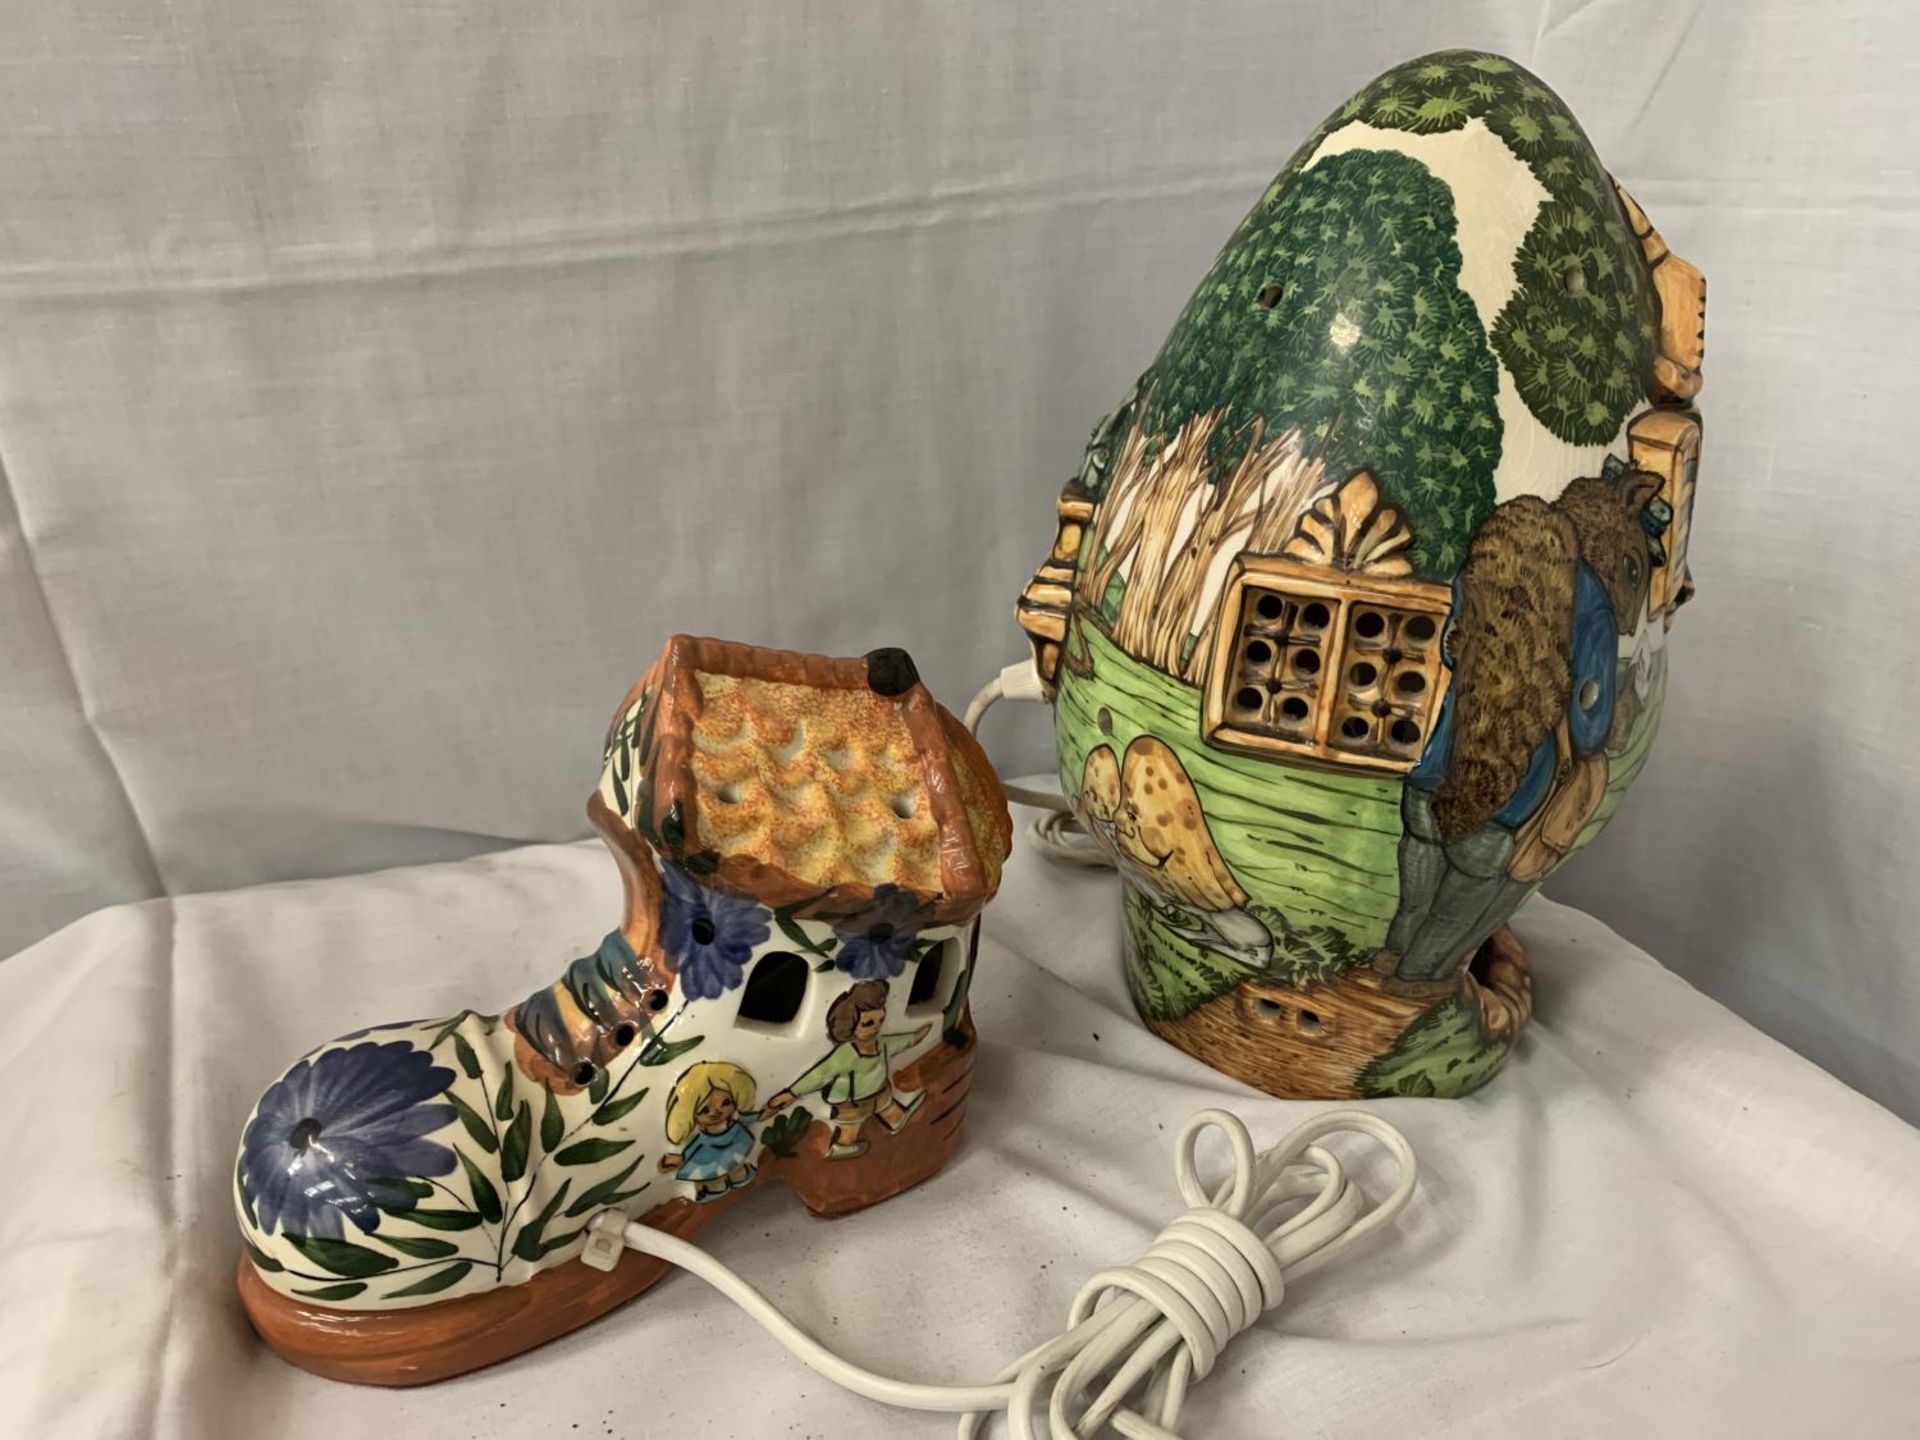 TWO CERAMIC CHILDREN'S NIGHTLIGHT LAMPS ONE BEING IN THE FORM OF A TREEHOUSE AND THE OTHER A BOOT - Image 5 of 5